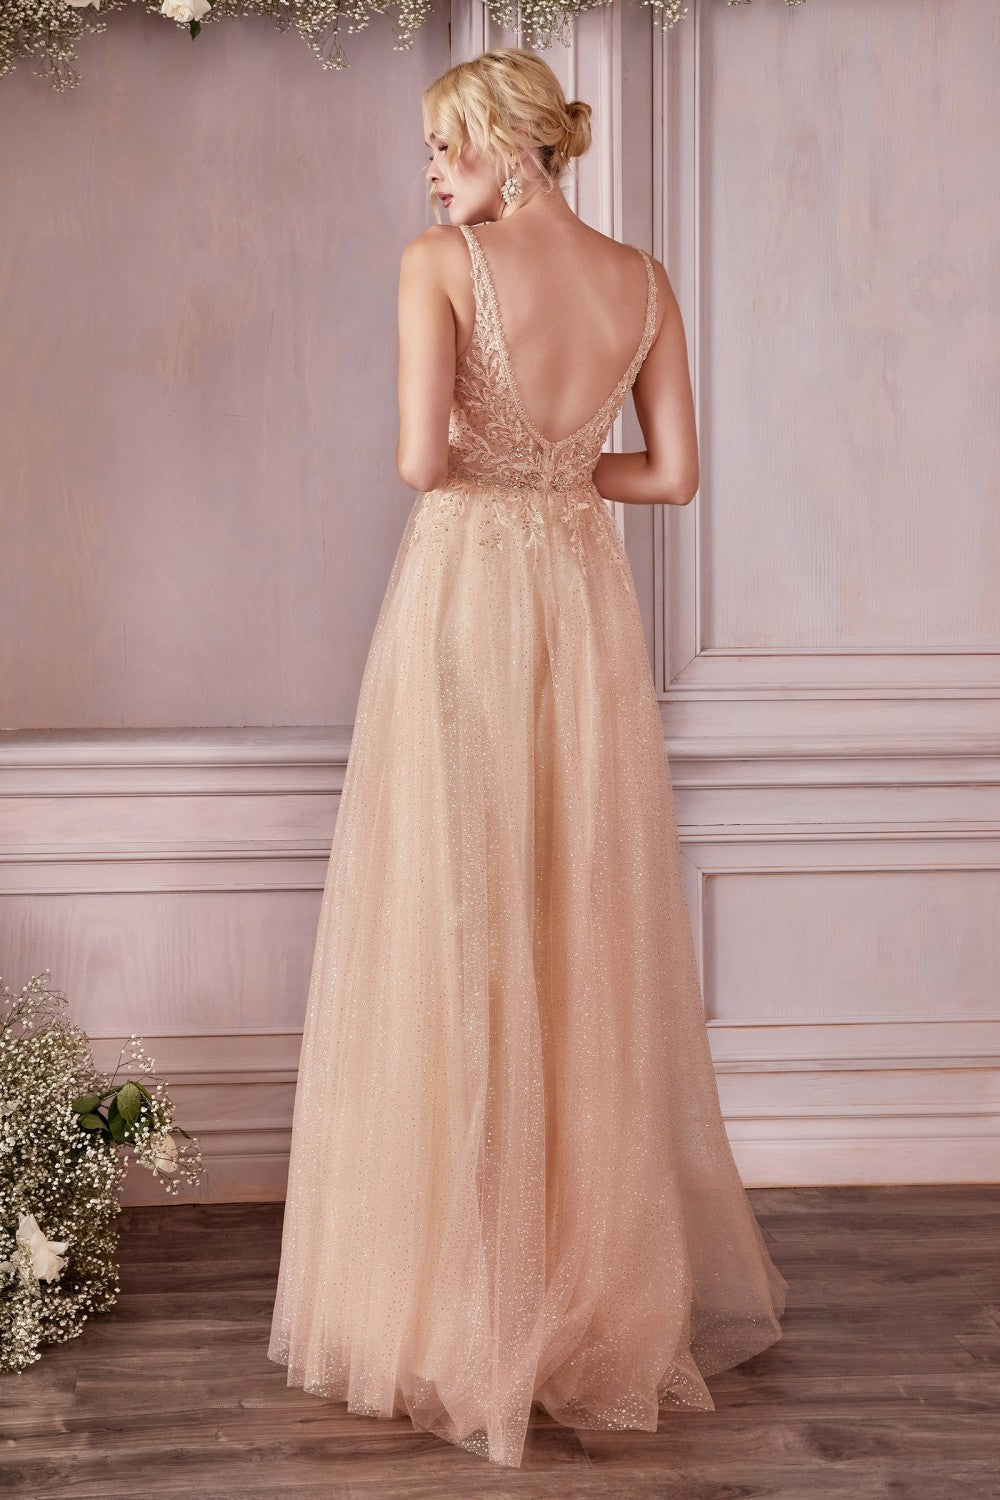 Tender Modern Vintage Evening & Prom Gown Layered Tulle A-line Skirt Deep V-neck Backless Body Sensual Dresses Boho Style CDCD0196 Elsy Style Prom Dress